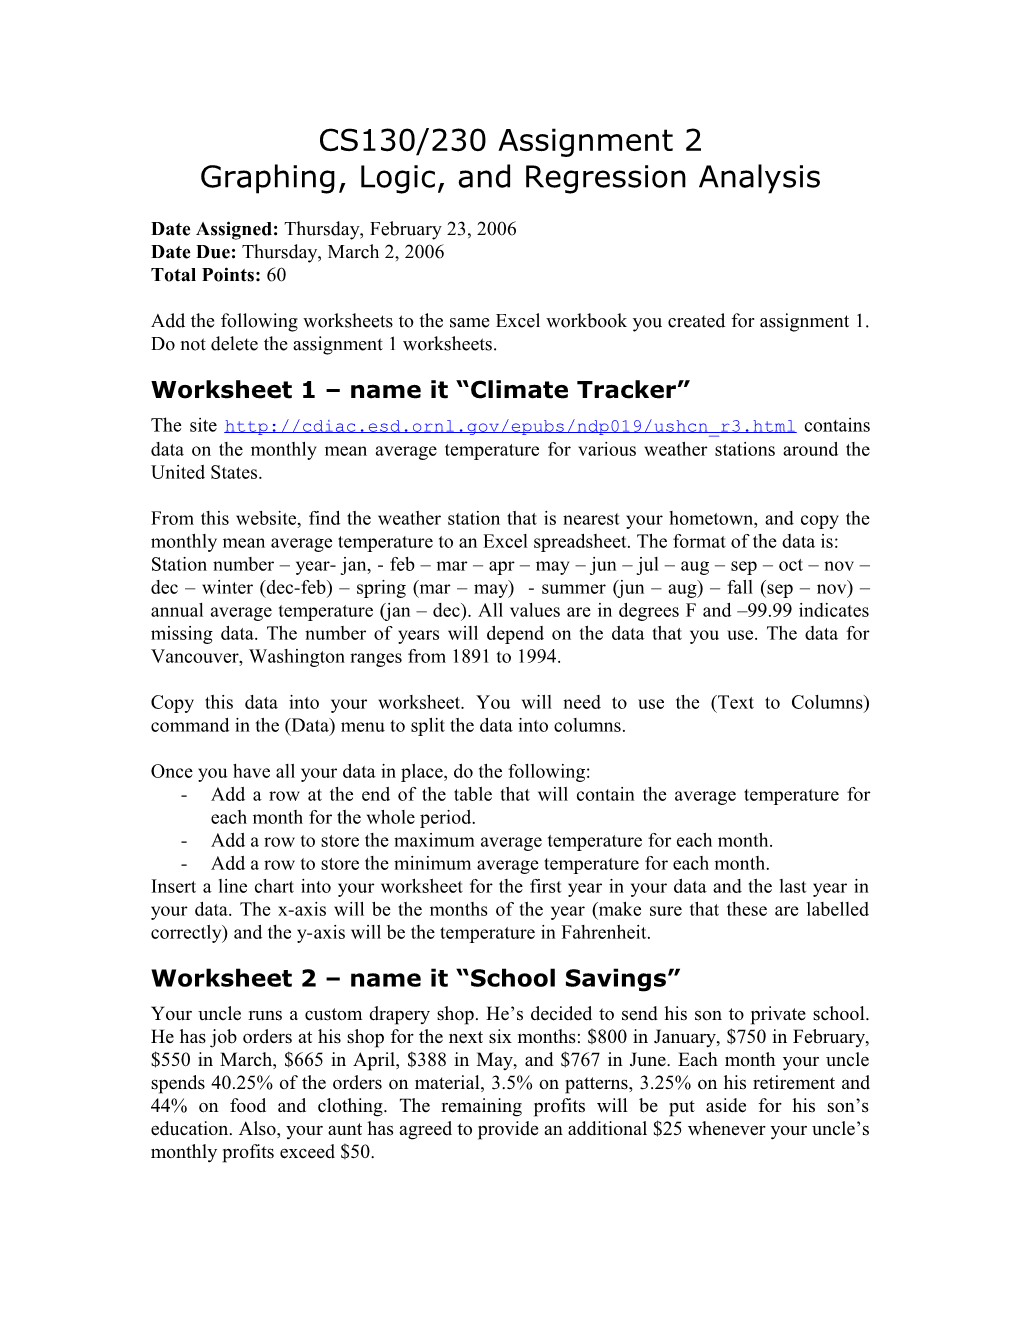 Graphing,Logic, and Regression Analysis